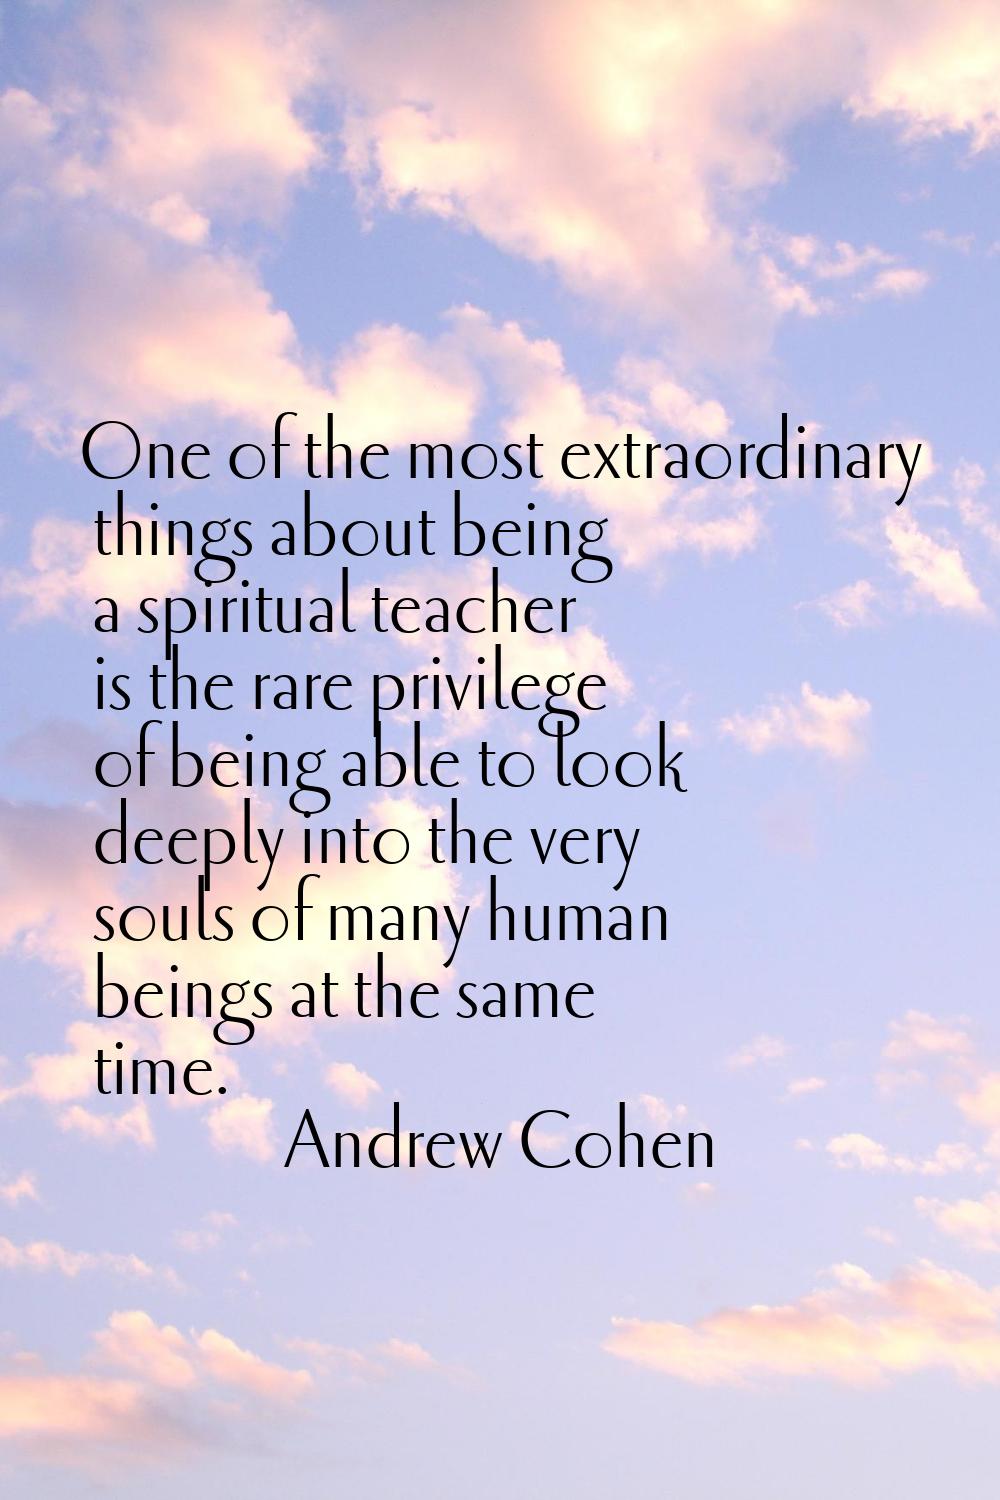 One of the most extraordinary things about being a spiritual teacher is the rare privilege of being